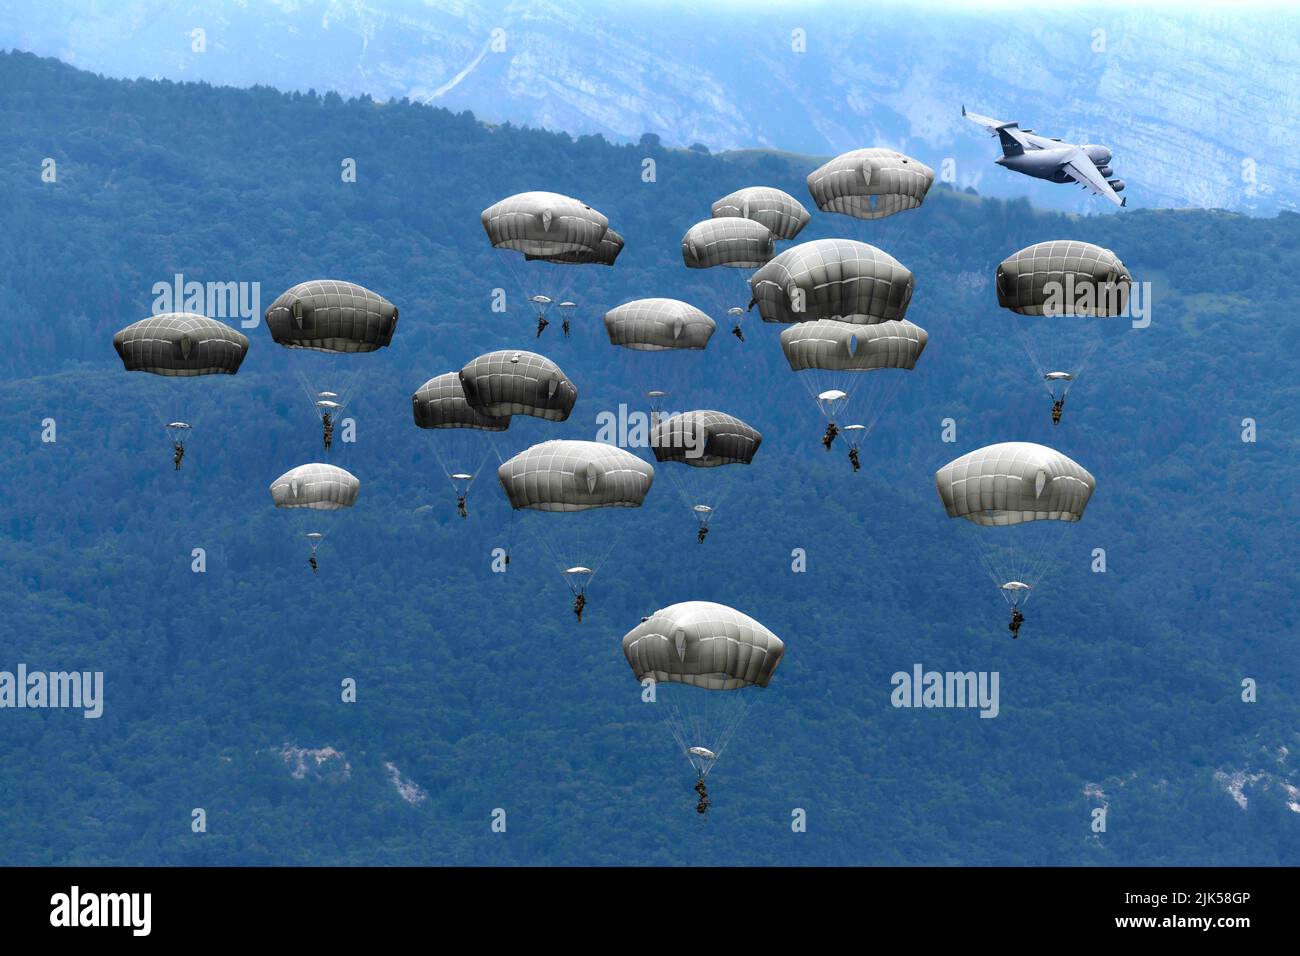 July 7, 2022 - Pordenone, Italy - U.S. Army paratroopers assigned to the 1st Battalion, 503rd Parachute Infantry Regiment, 173rd Airborne Brigade, Italian Army paratroopers assigned to 4th Alpini Regiment, Folgore Brigade and Italian Army assigned to Command of the Army Special Forces (COMFOSE), conduct an airborne operation from a C17 Globemaster III Aircraft from Papa Air Base Hungary onto Julyiet Drop Zone in Pordenone, Italy on July 7, 2022. The 173rd Airborne Brigade is the U.S. Army Contingency Response Force in Europe, capable of projecting ready forces anywhere in the U.S. European, Af Stock Photo